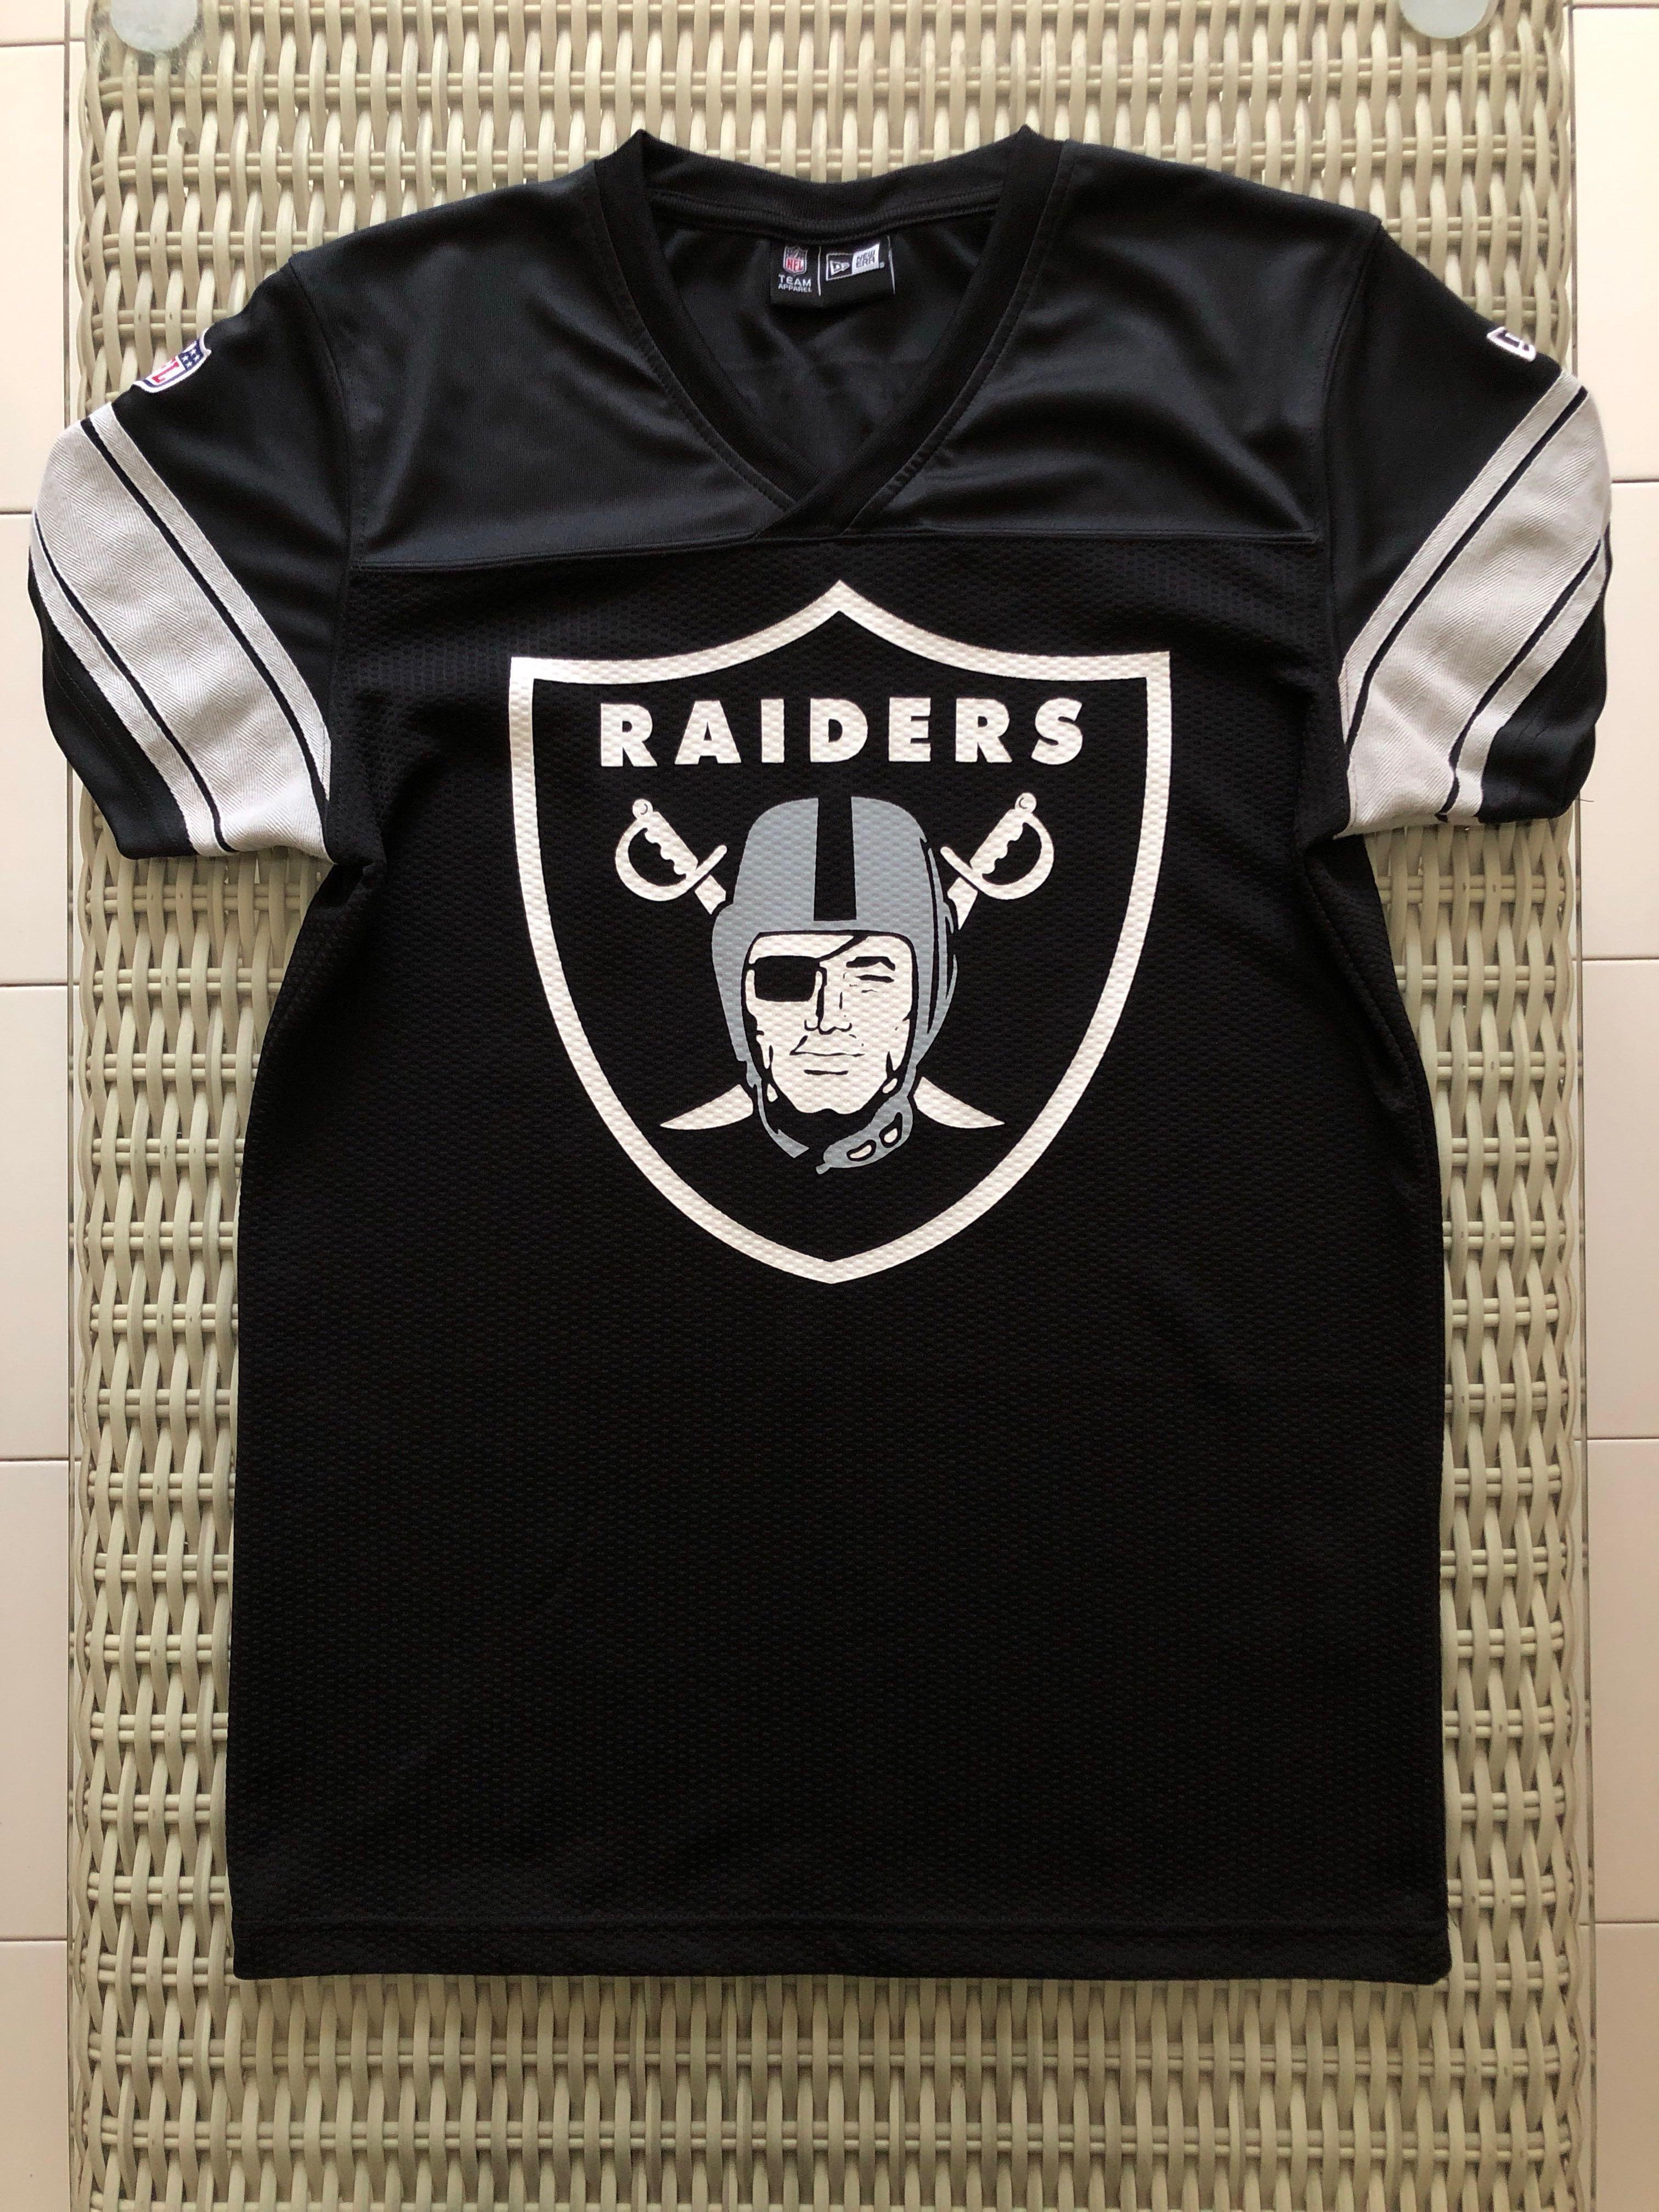 Los Angeles Raiders jersey for SGD$52 